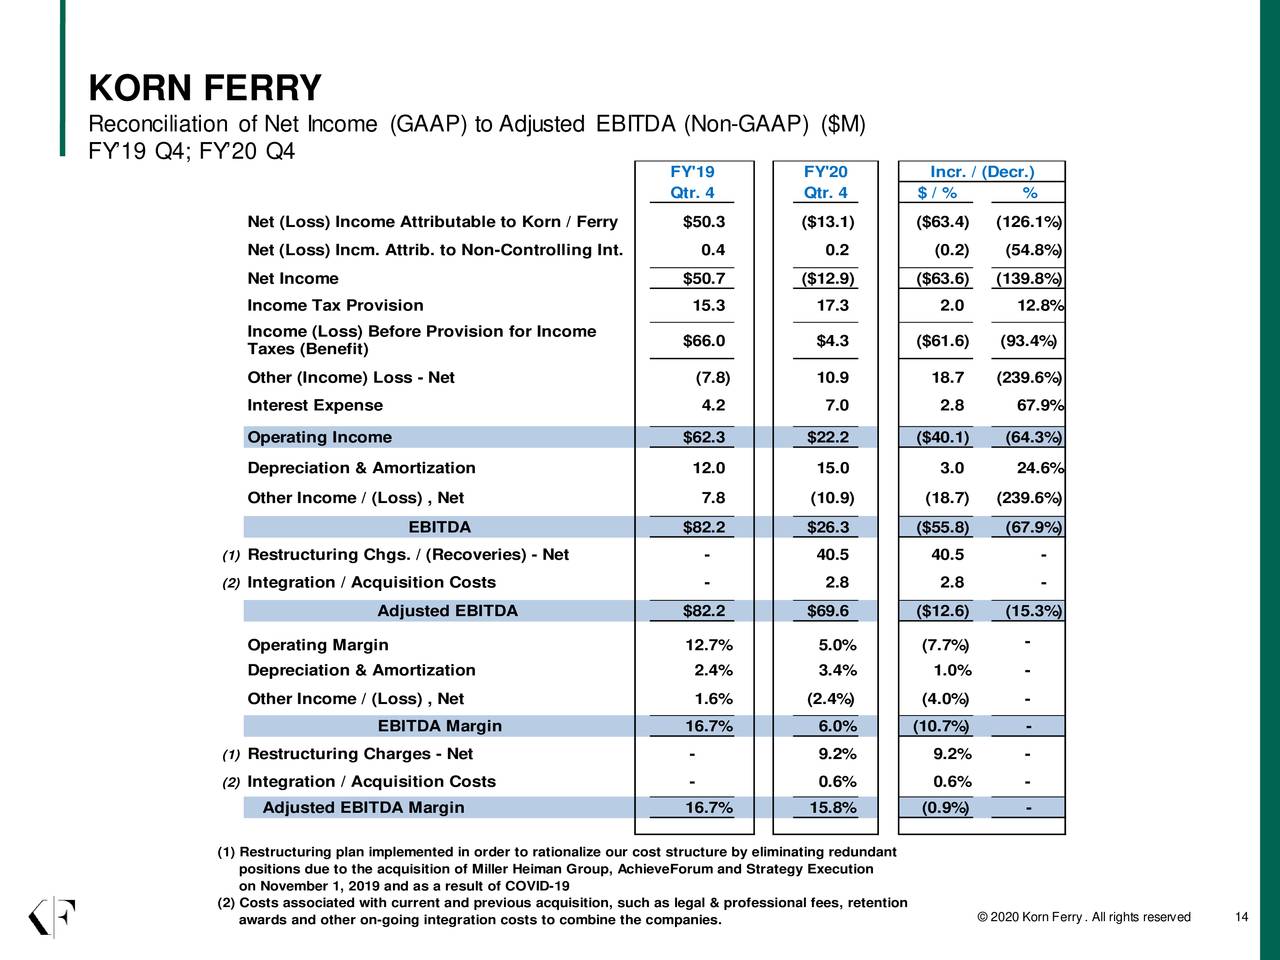 Korn Ferry 2020 Q4 Results Earnings Call Presentation (NYSE:KFY